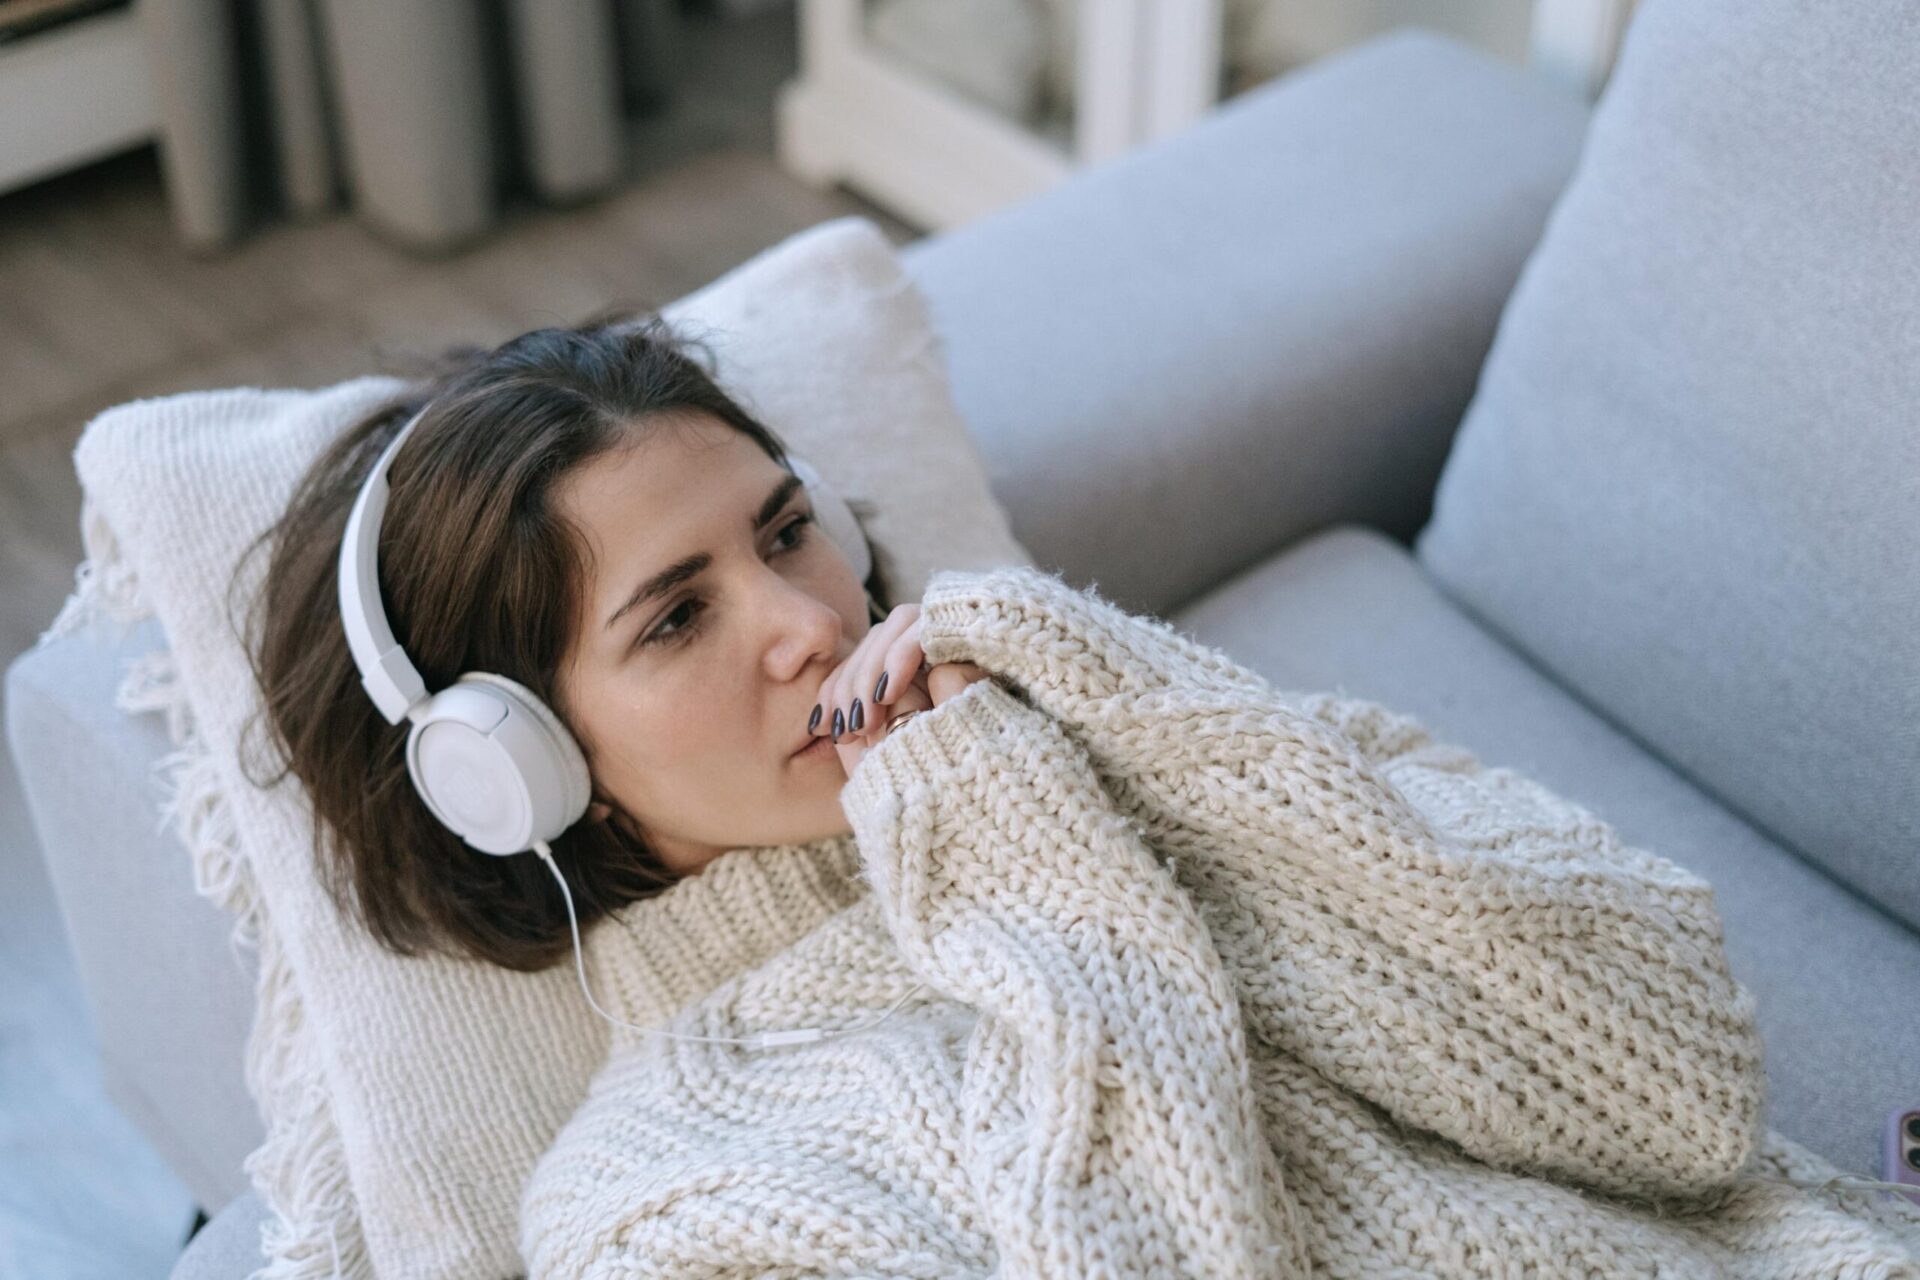 music to beat the winter blues